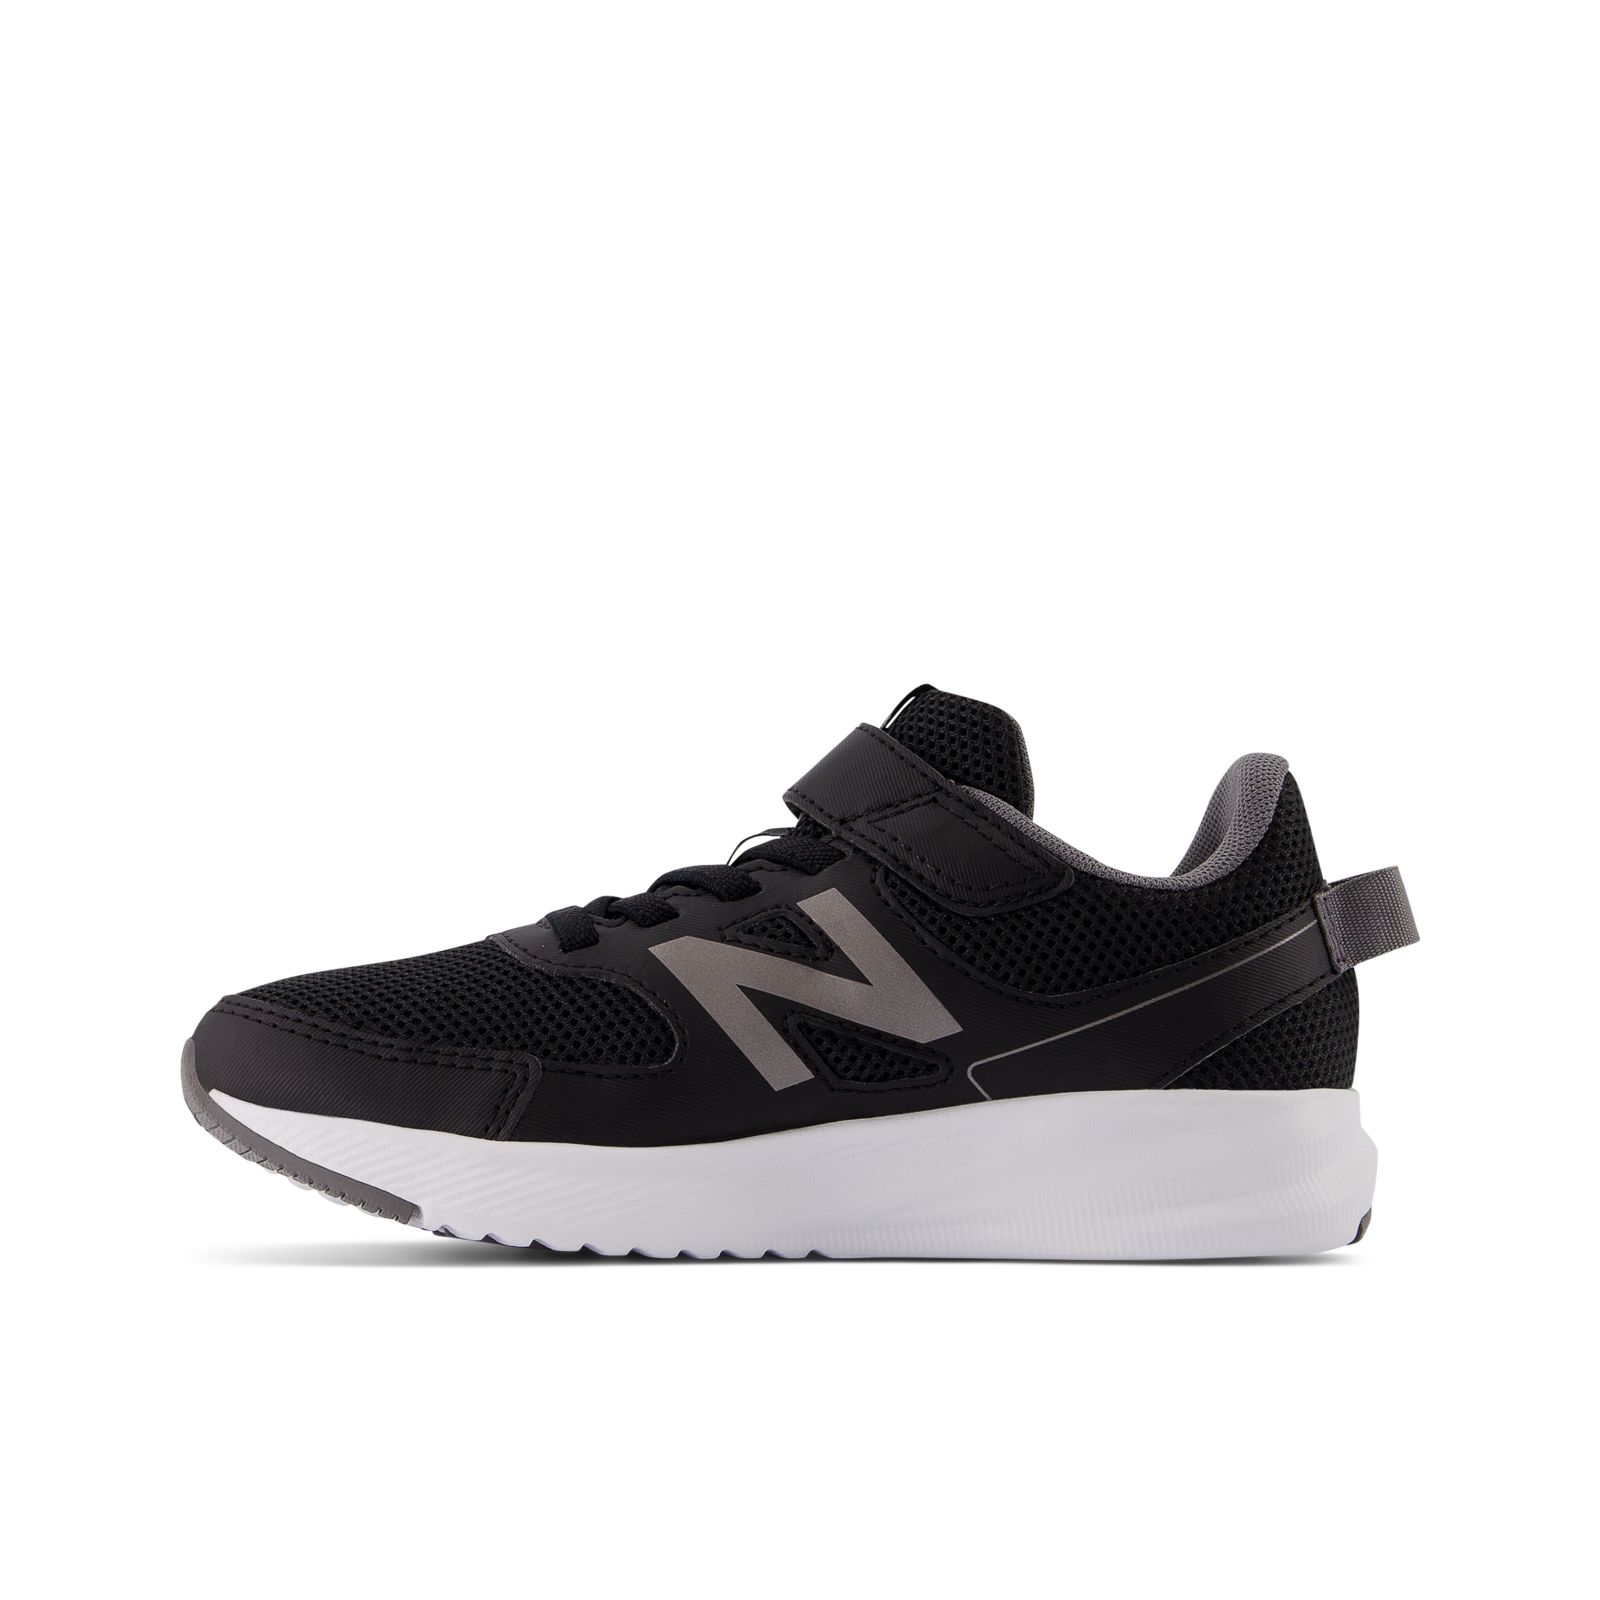 Mente Mortal Valiente 570v3 Bungee Lace with Top Strap Niños - New Balance